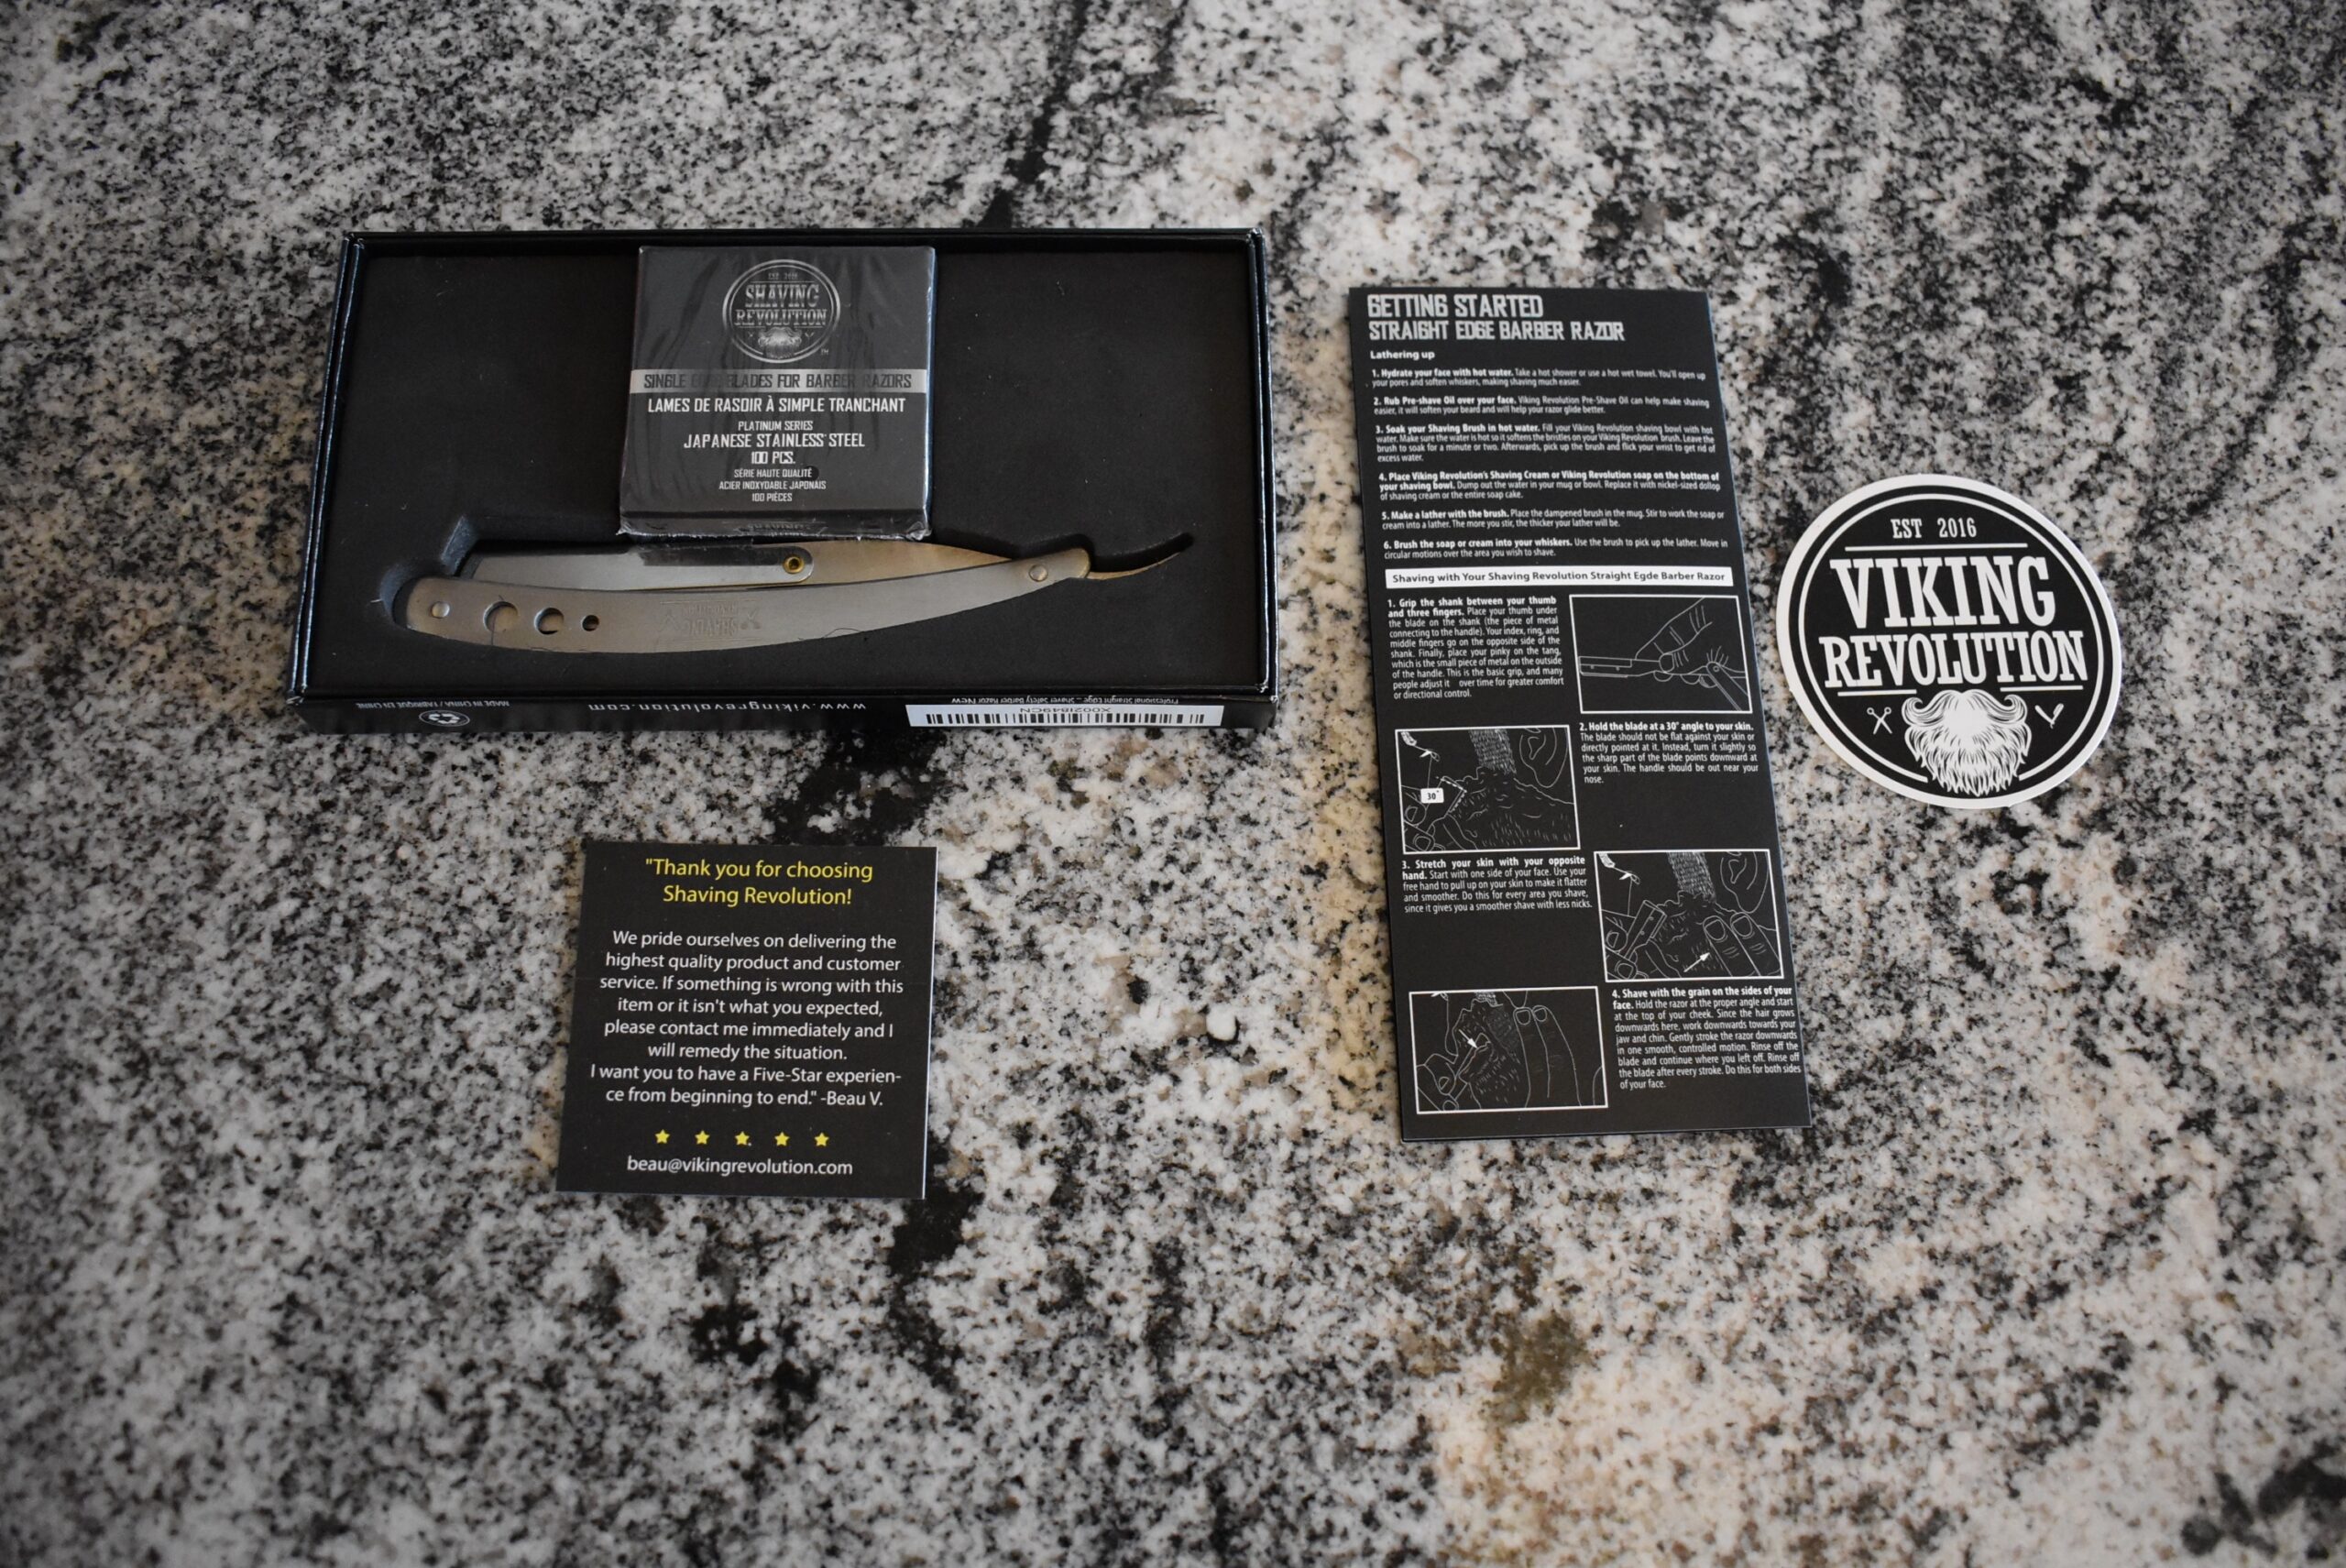 The Viking Revolution straight razor along with a number of inserts and blades on a granite counter